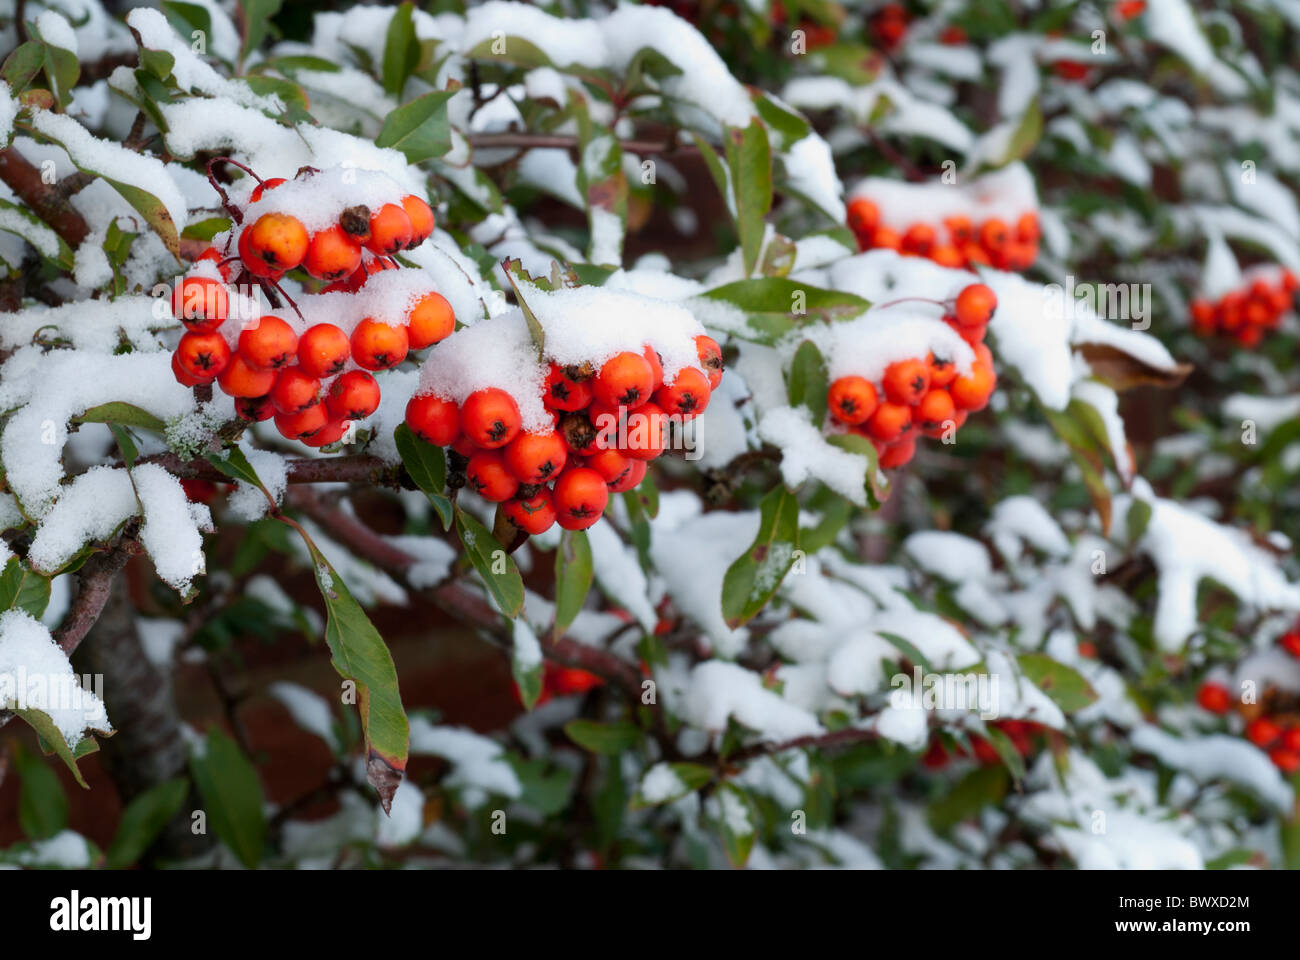 Frozen Snow on Pyracantha (Firethorn) Hedge and Berries Stock Photo